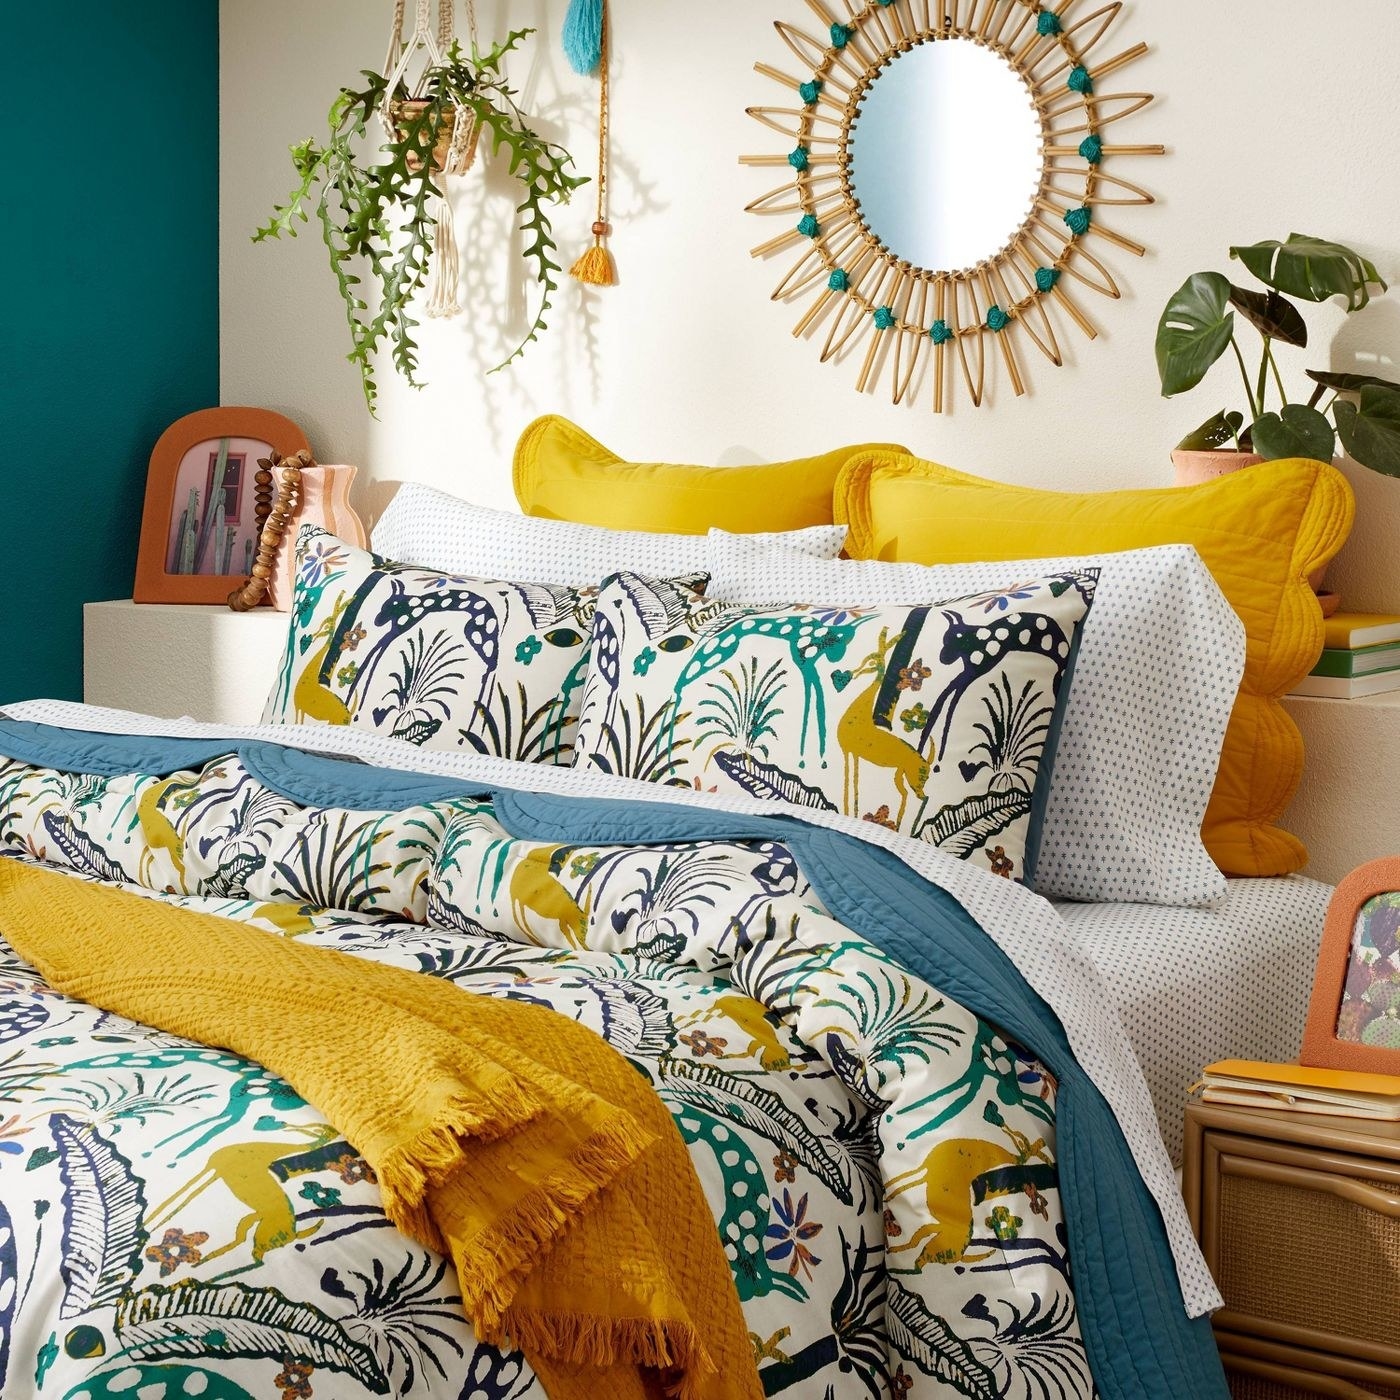 A brightly colored bed with a printed comforter